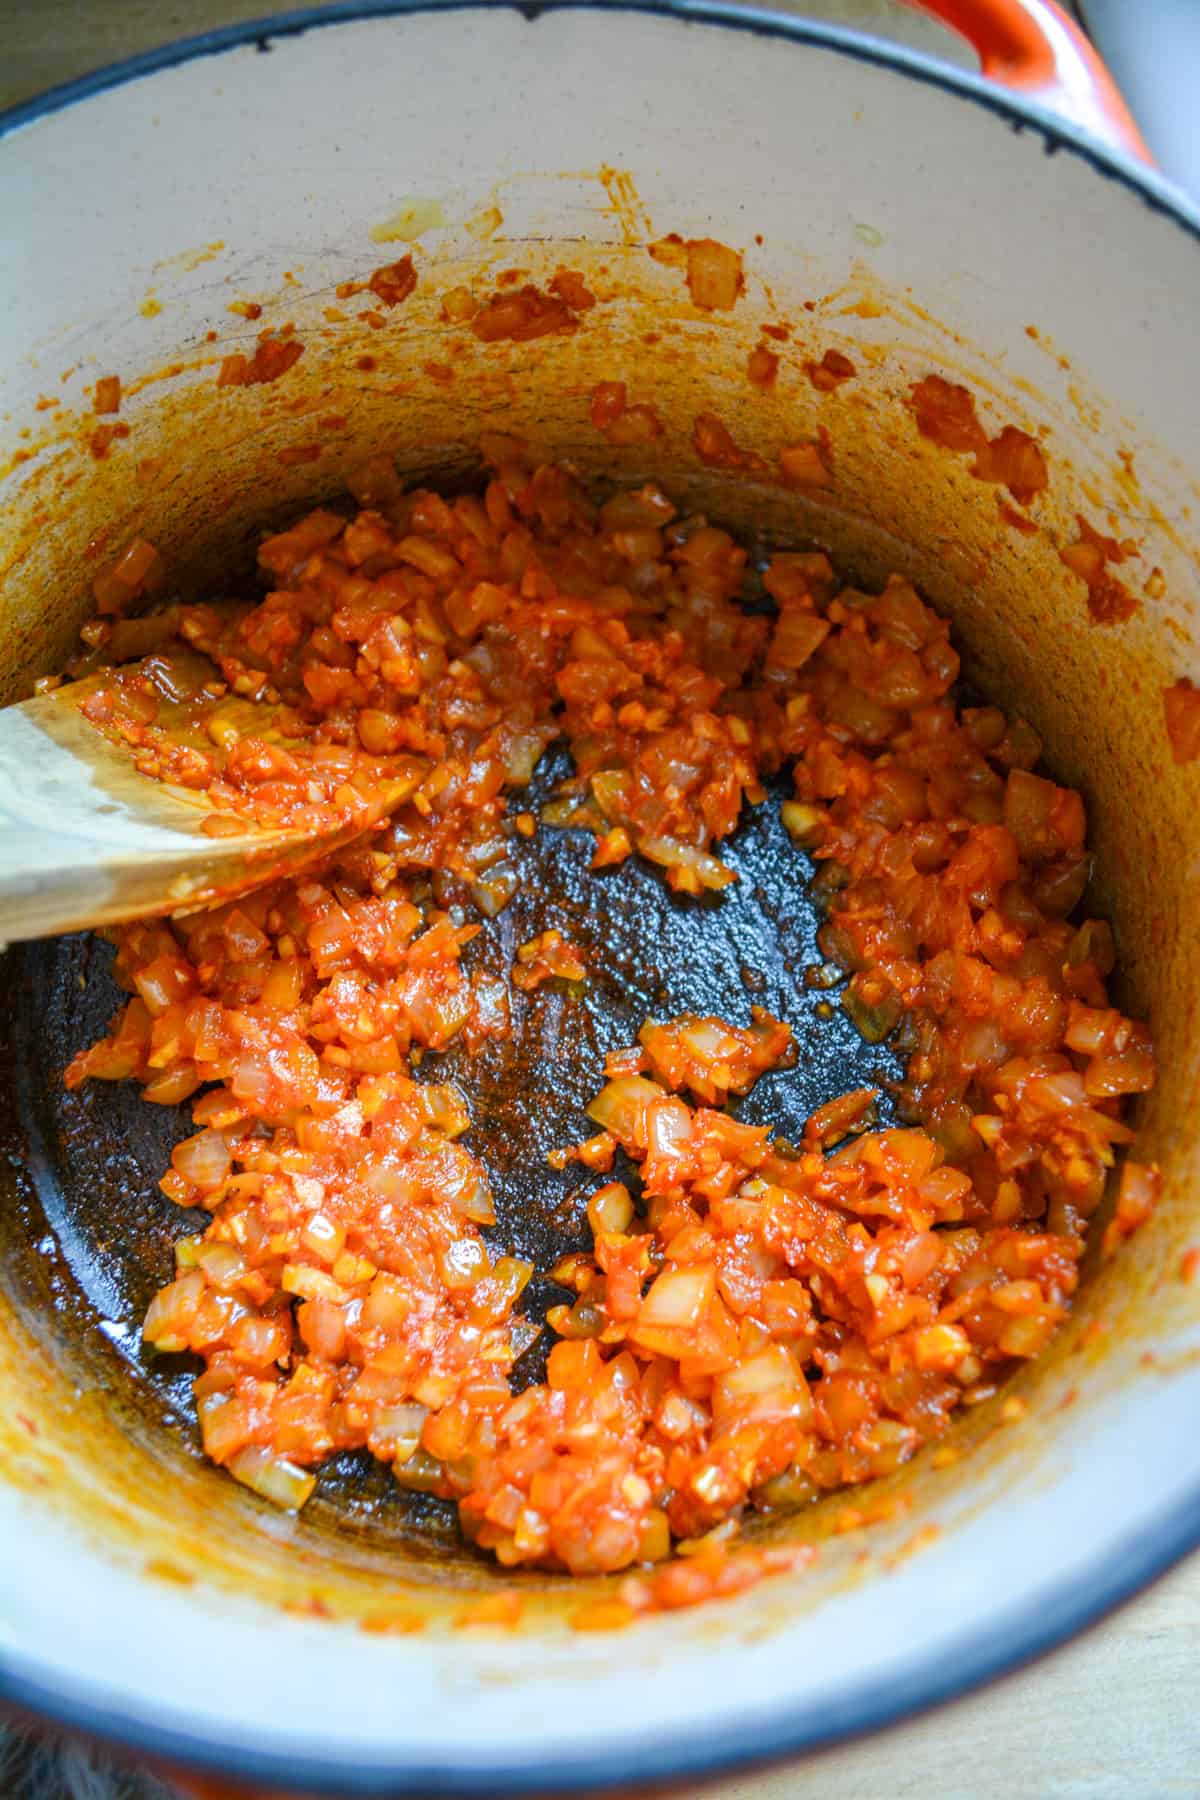 The tomato paste stirred through the onion and garlic with a wooden spoon.